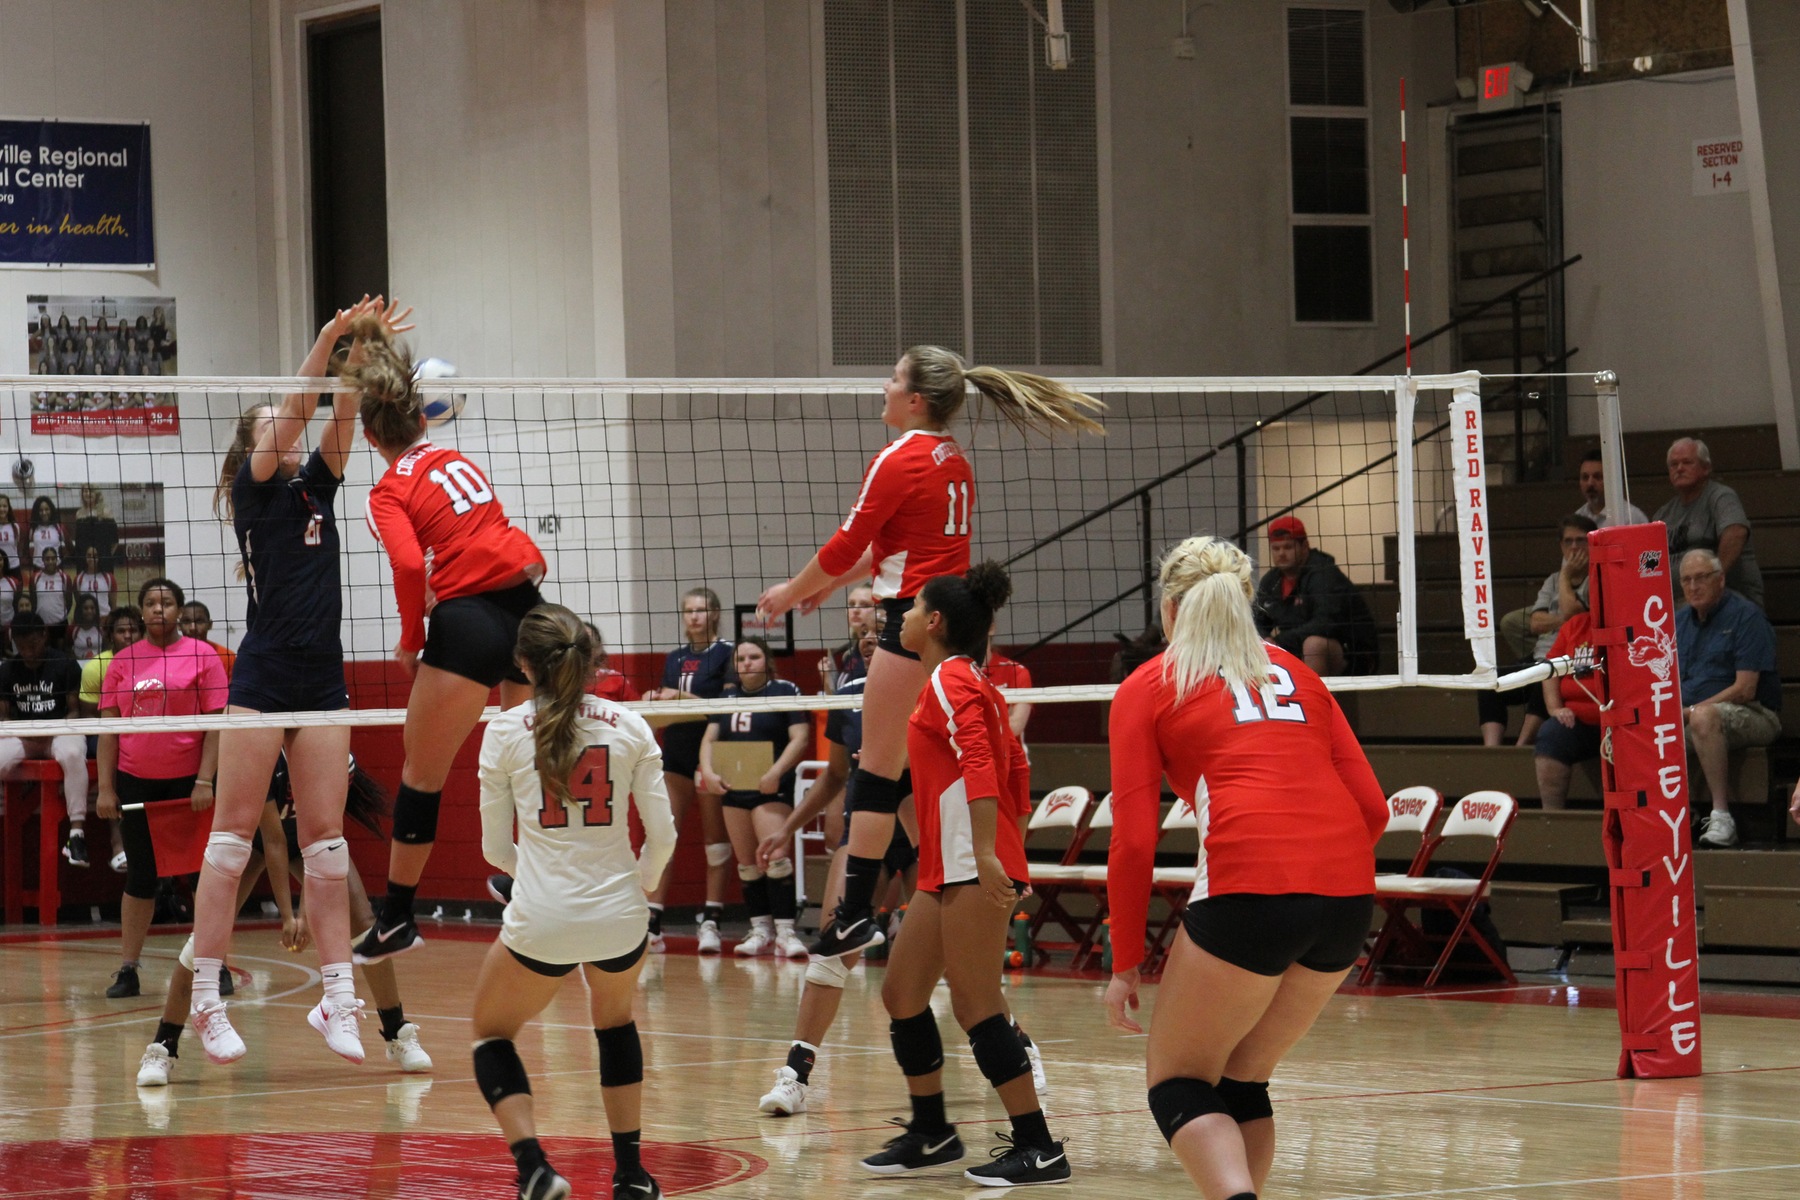 Red Raven Volleyball Suffers 1st Loss of Season: Lose to #14 ranked Div I Iowa Western 3-2, Maintain #2 ranking